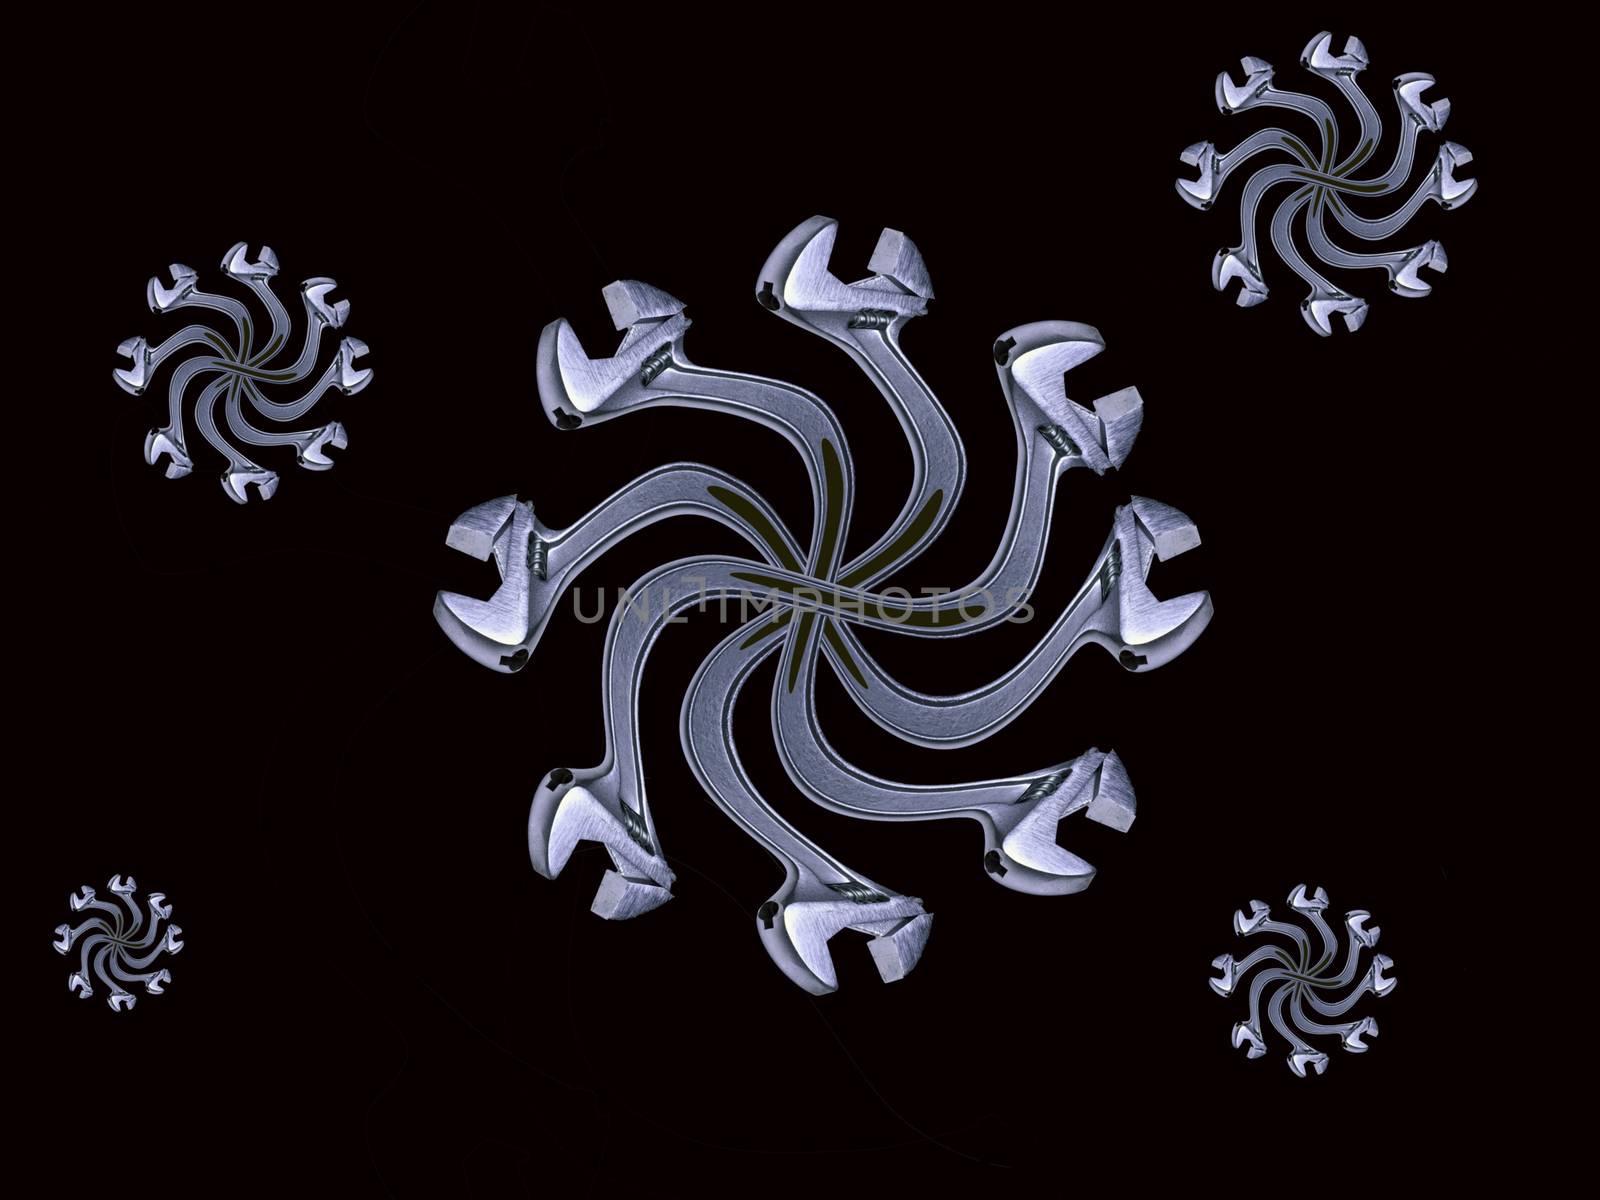 Chrome metal snowflakes, a joke image of a tool designed for top-level masters